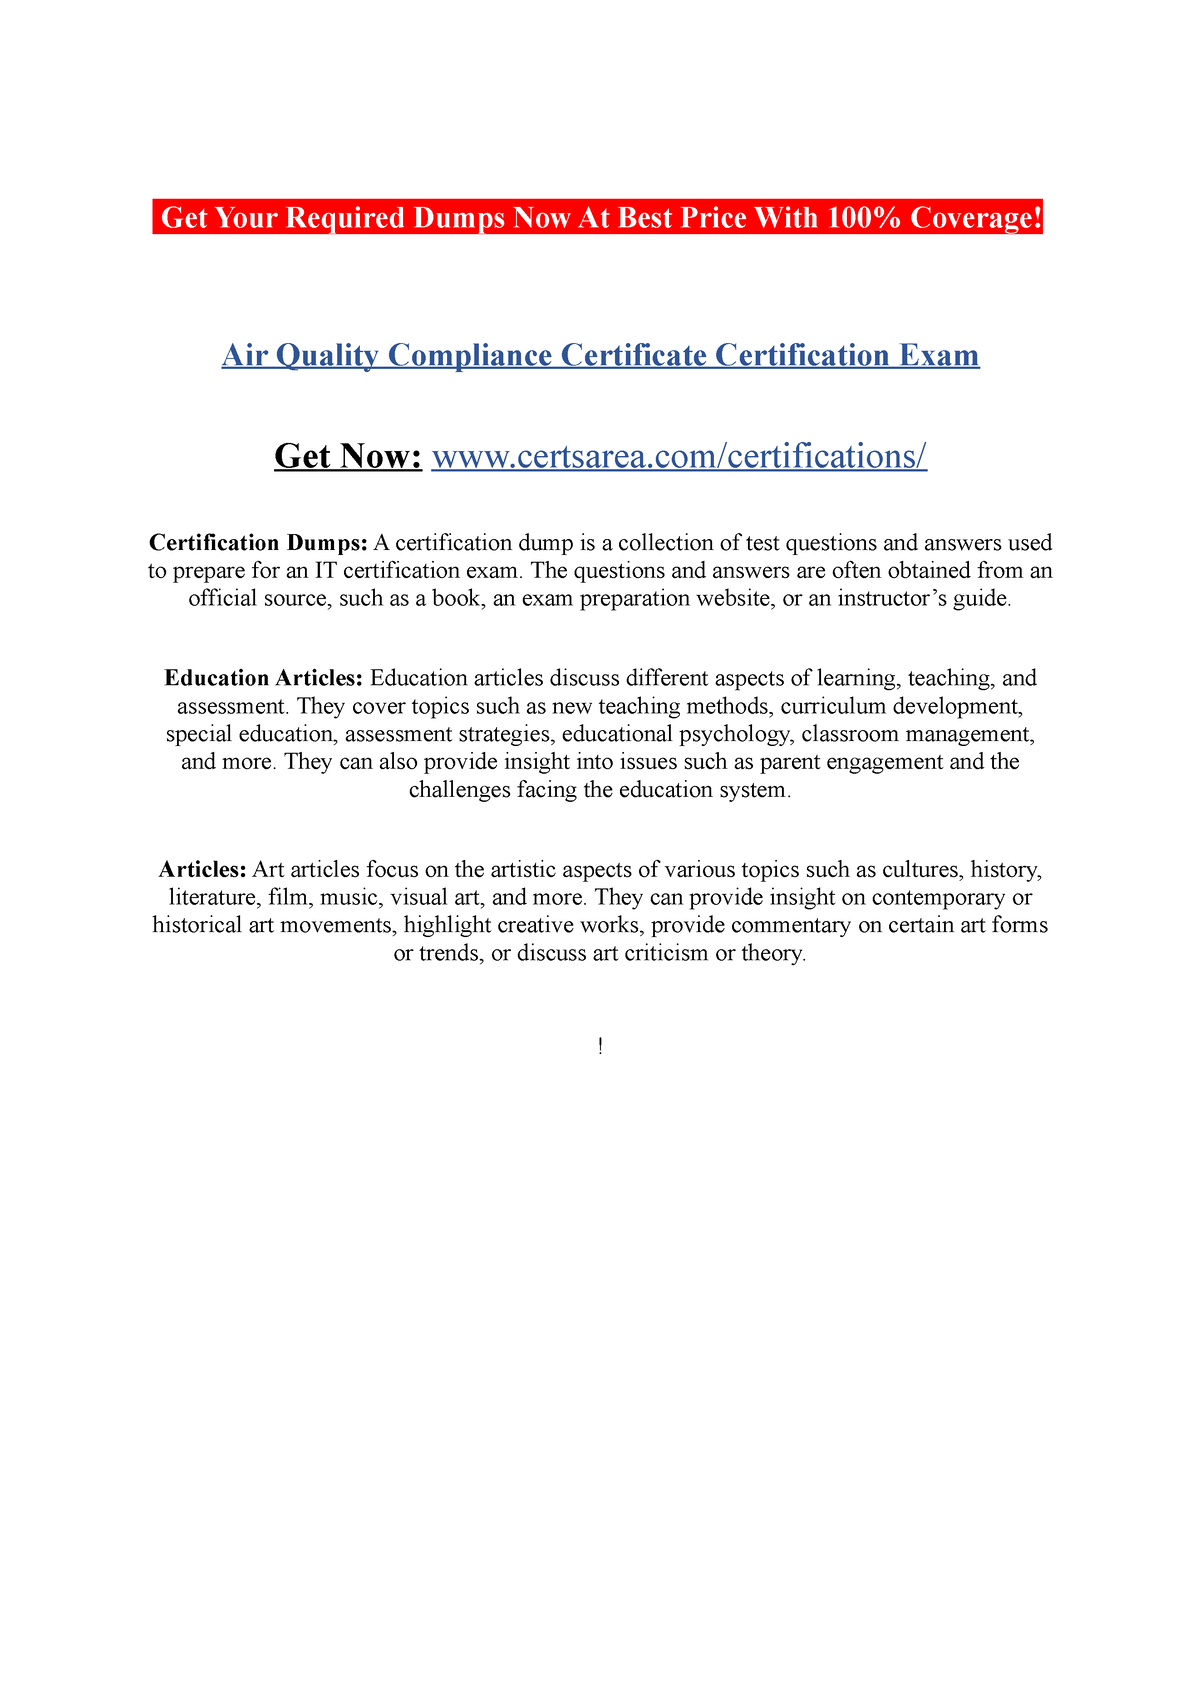 Air Quality Compliance Certificate Certification Exam Get Your